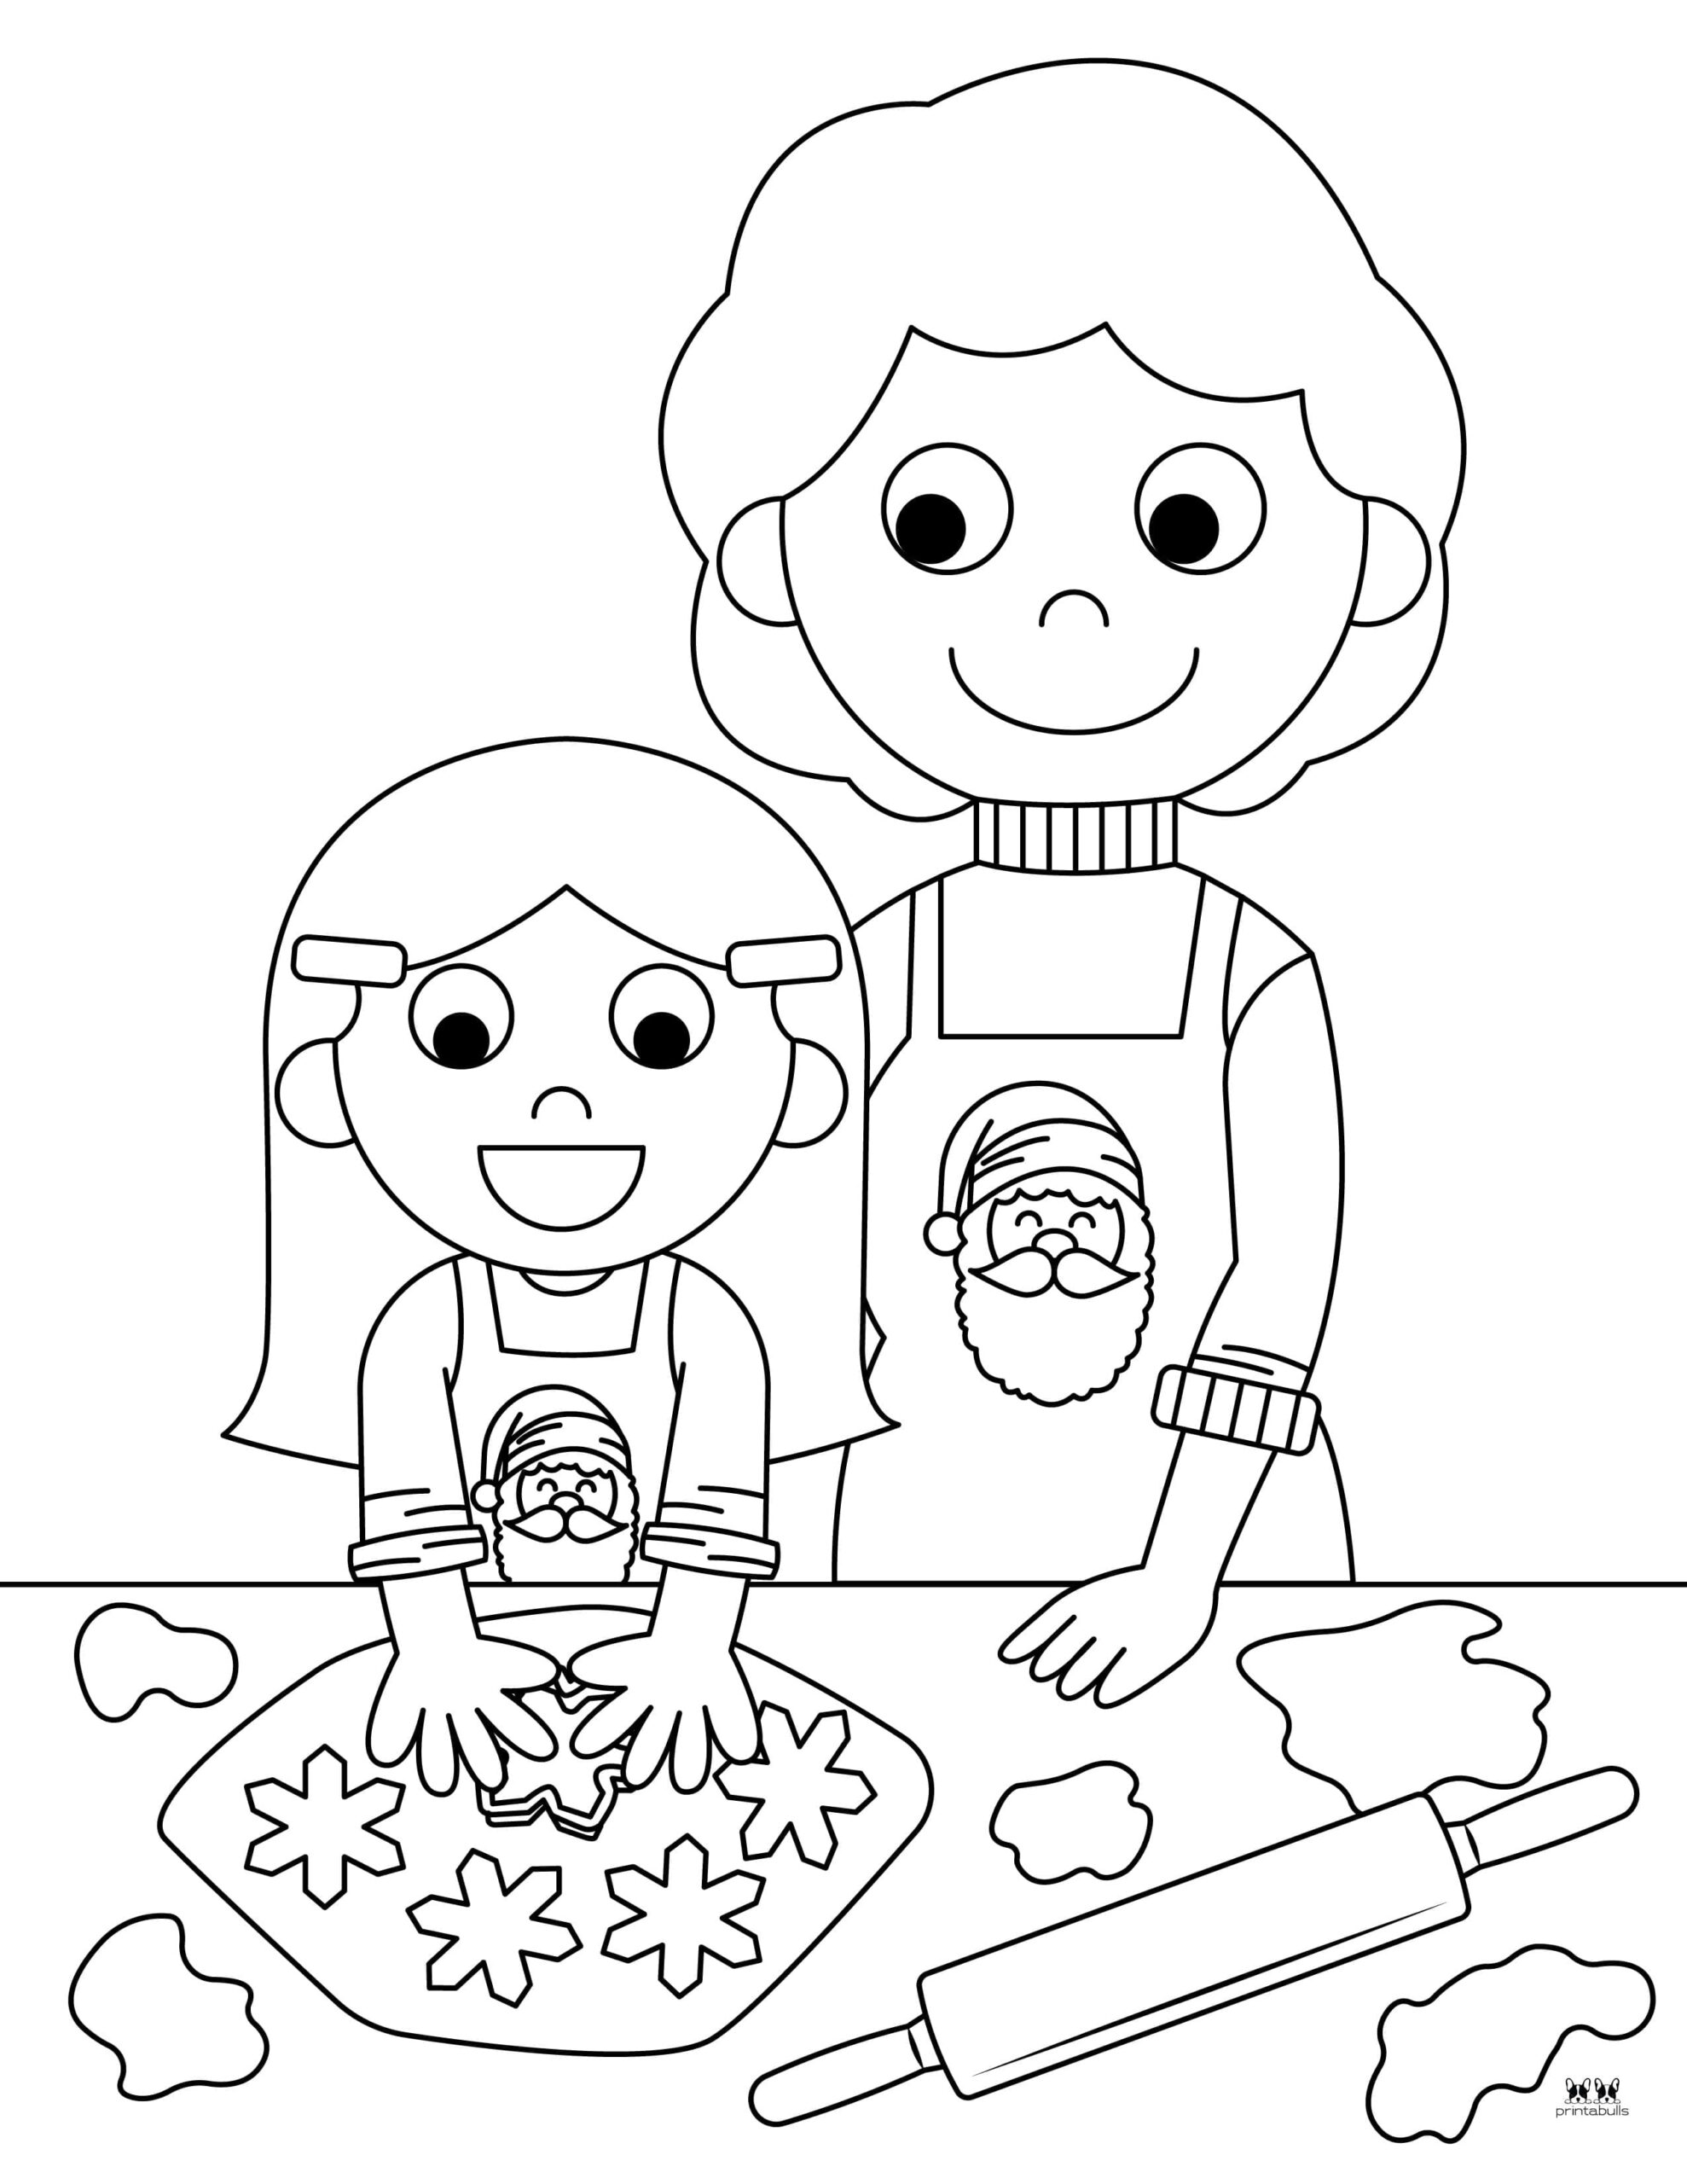 Christmas Cookies Coloring Pages - 25 FREE Pages | Printabulls